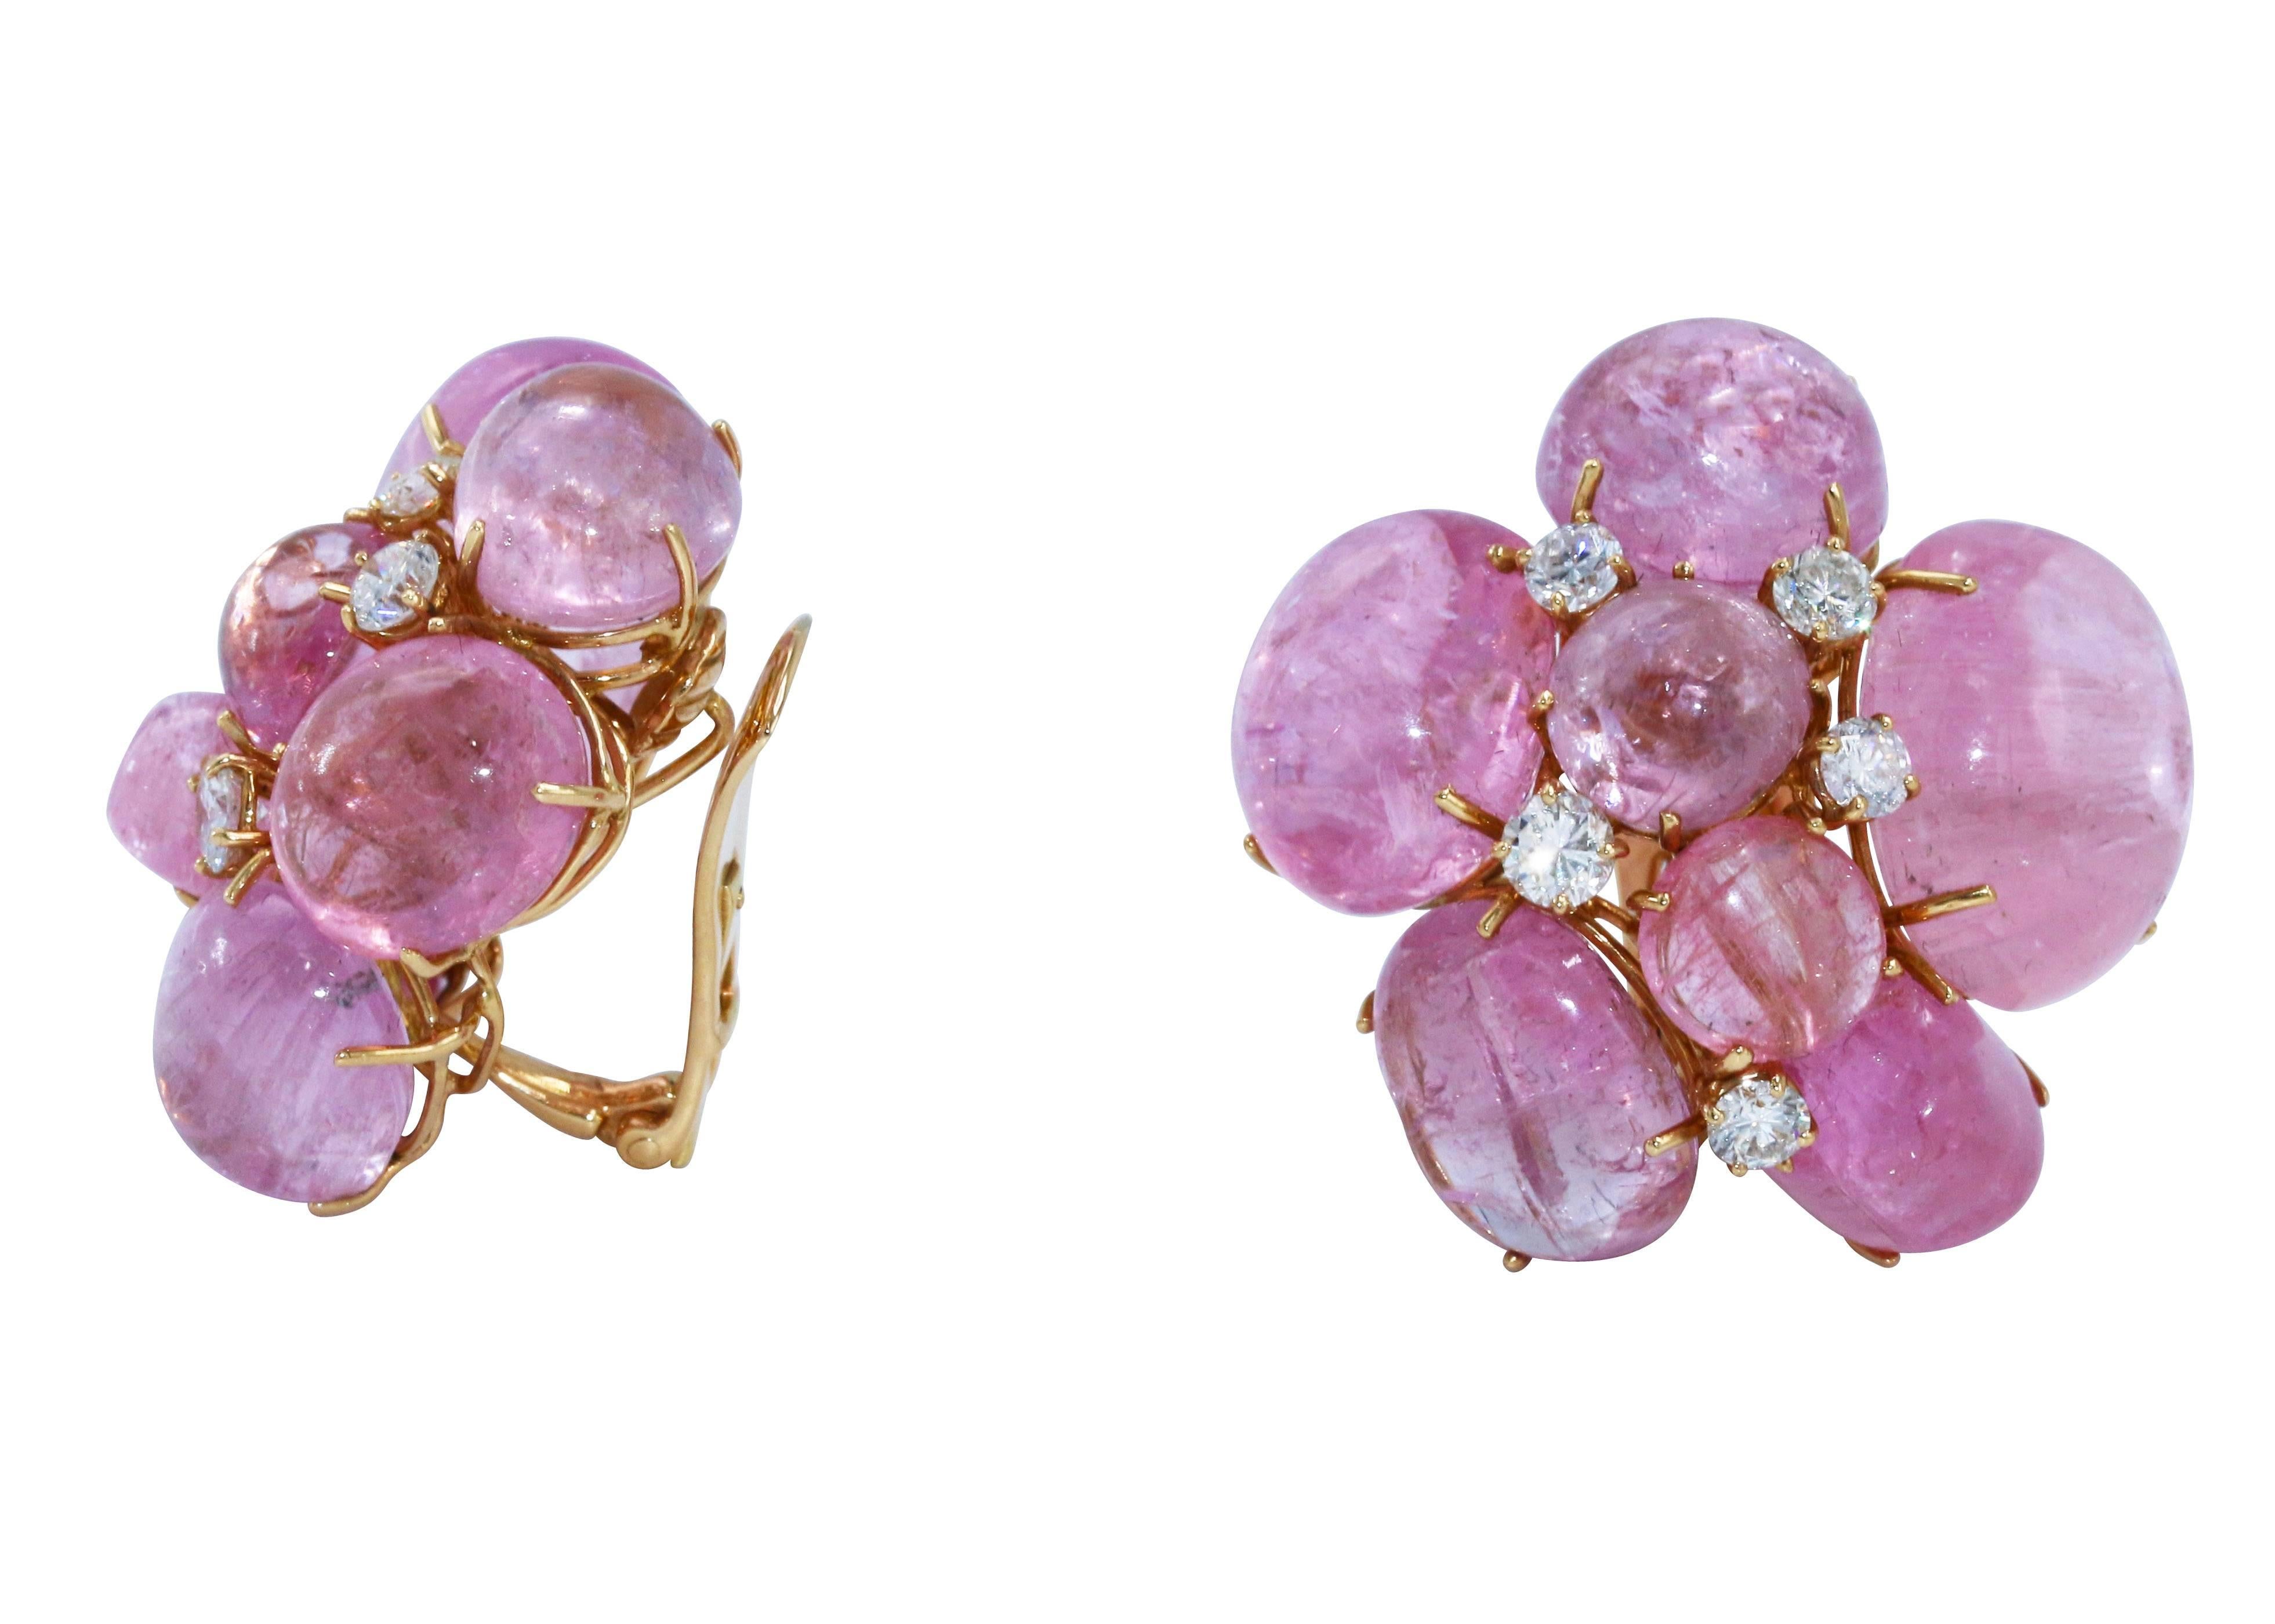 Pair of 18 karat rose gold, pink tourmaline and diamond earclips, designed as clusters of numerous cabochon pink tourmalines, accented by 10 round diamonds weighing approximately 2.20 carats, measuring 1 1/2 by 1 1/2 inches, gross weight 44.3